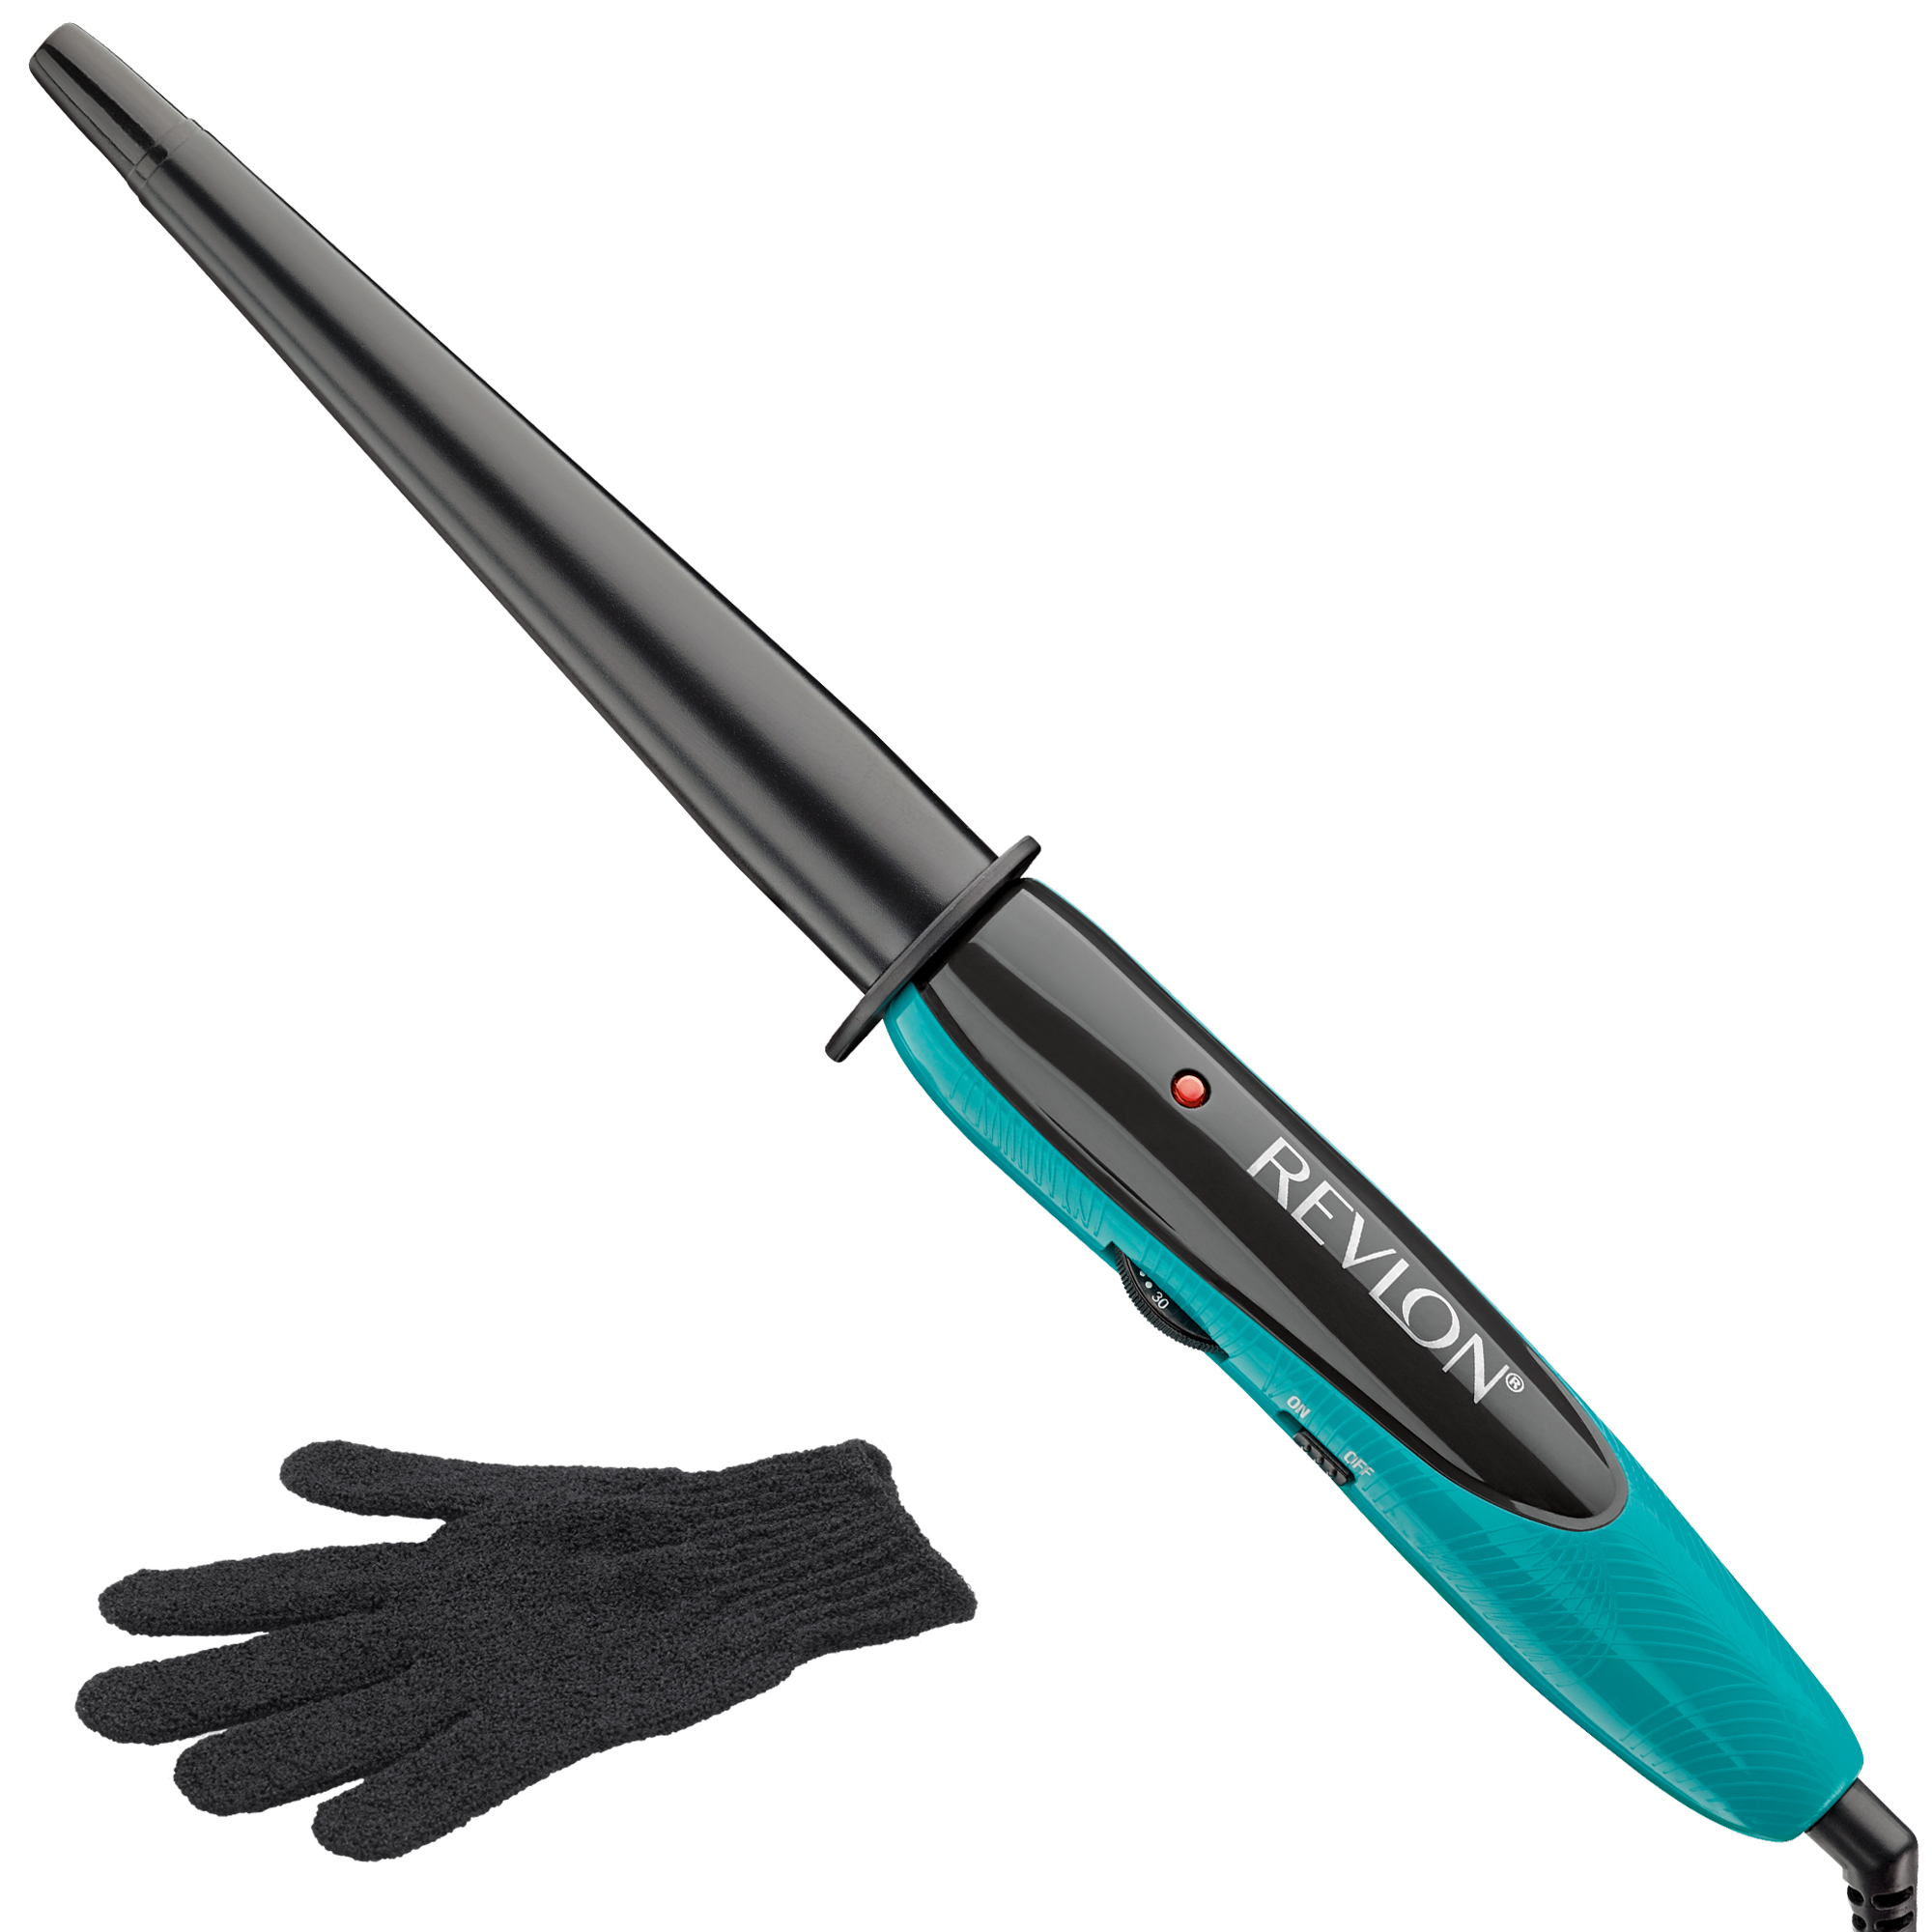 Revlon Perfect Heat Ceramic Tapered Curling Wand, Teal with Protective Glove - image 1 of 6